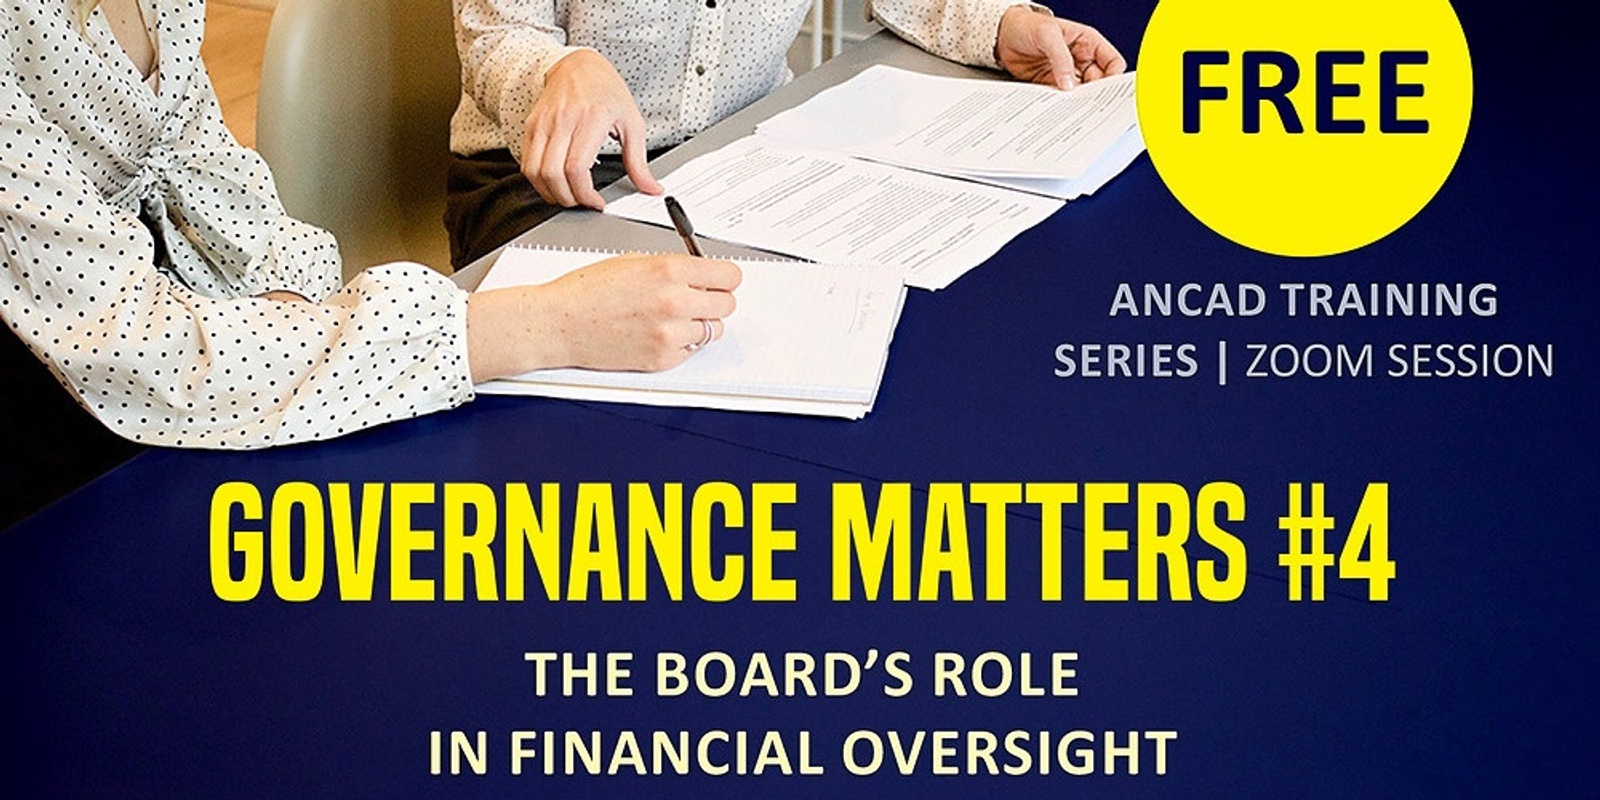 Banner image for GOVERNANCE MATTERS #4: The Board's role in financial oversight